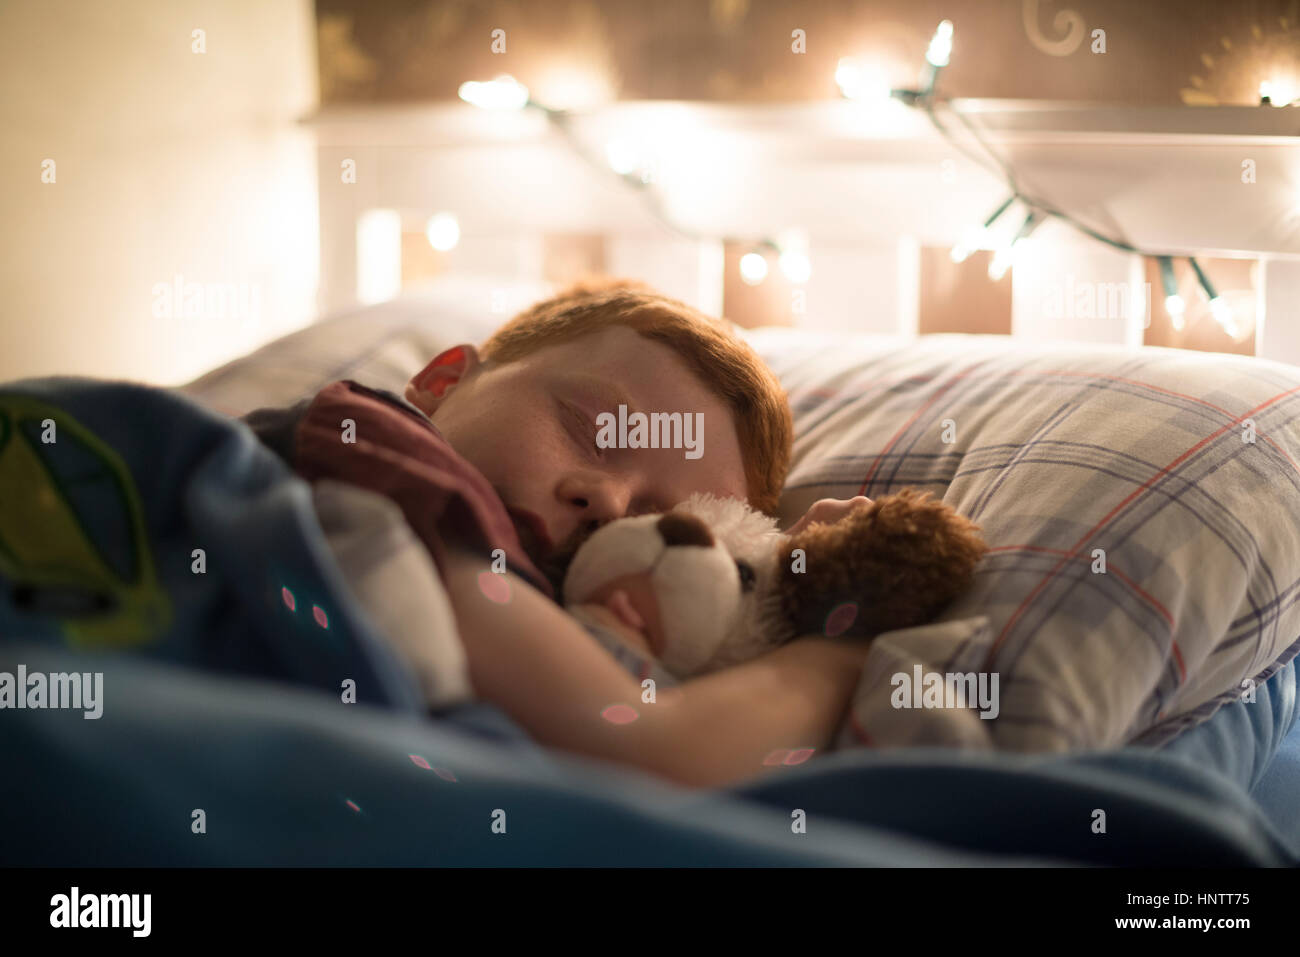 A child asleep in bed Stock Photo